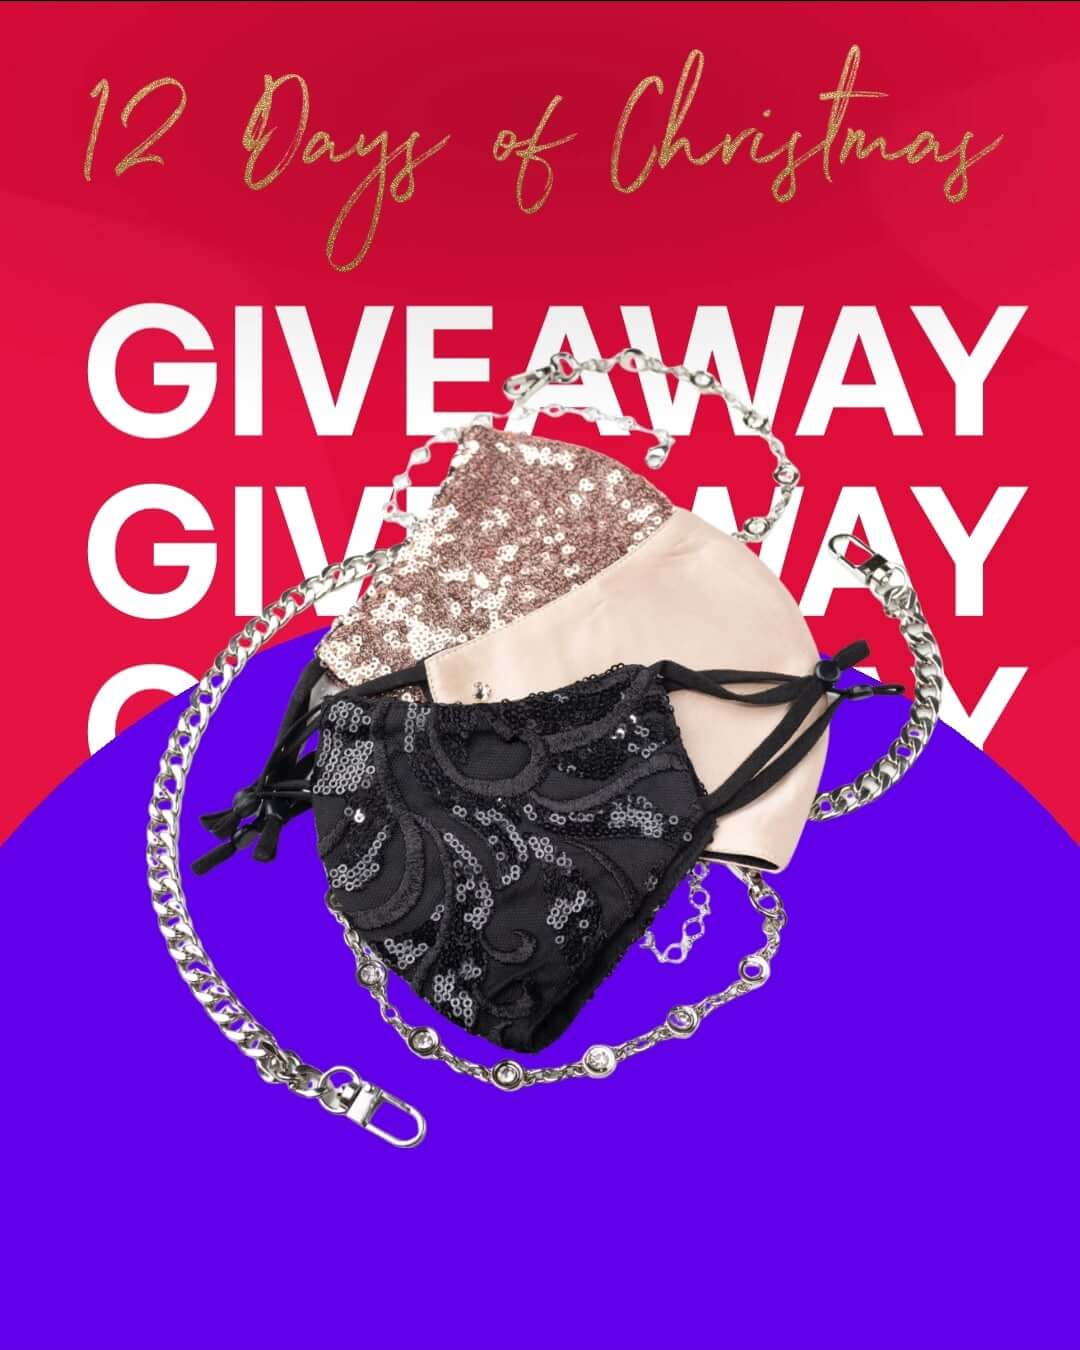 What you can win: Sequin Snakeskin Mask from Maskela